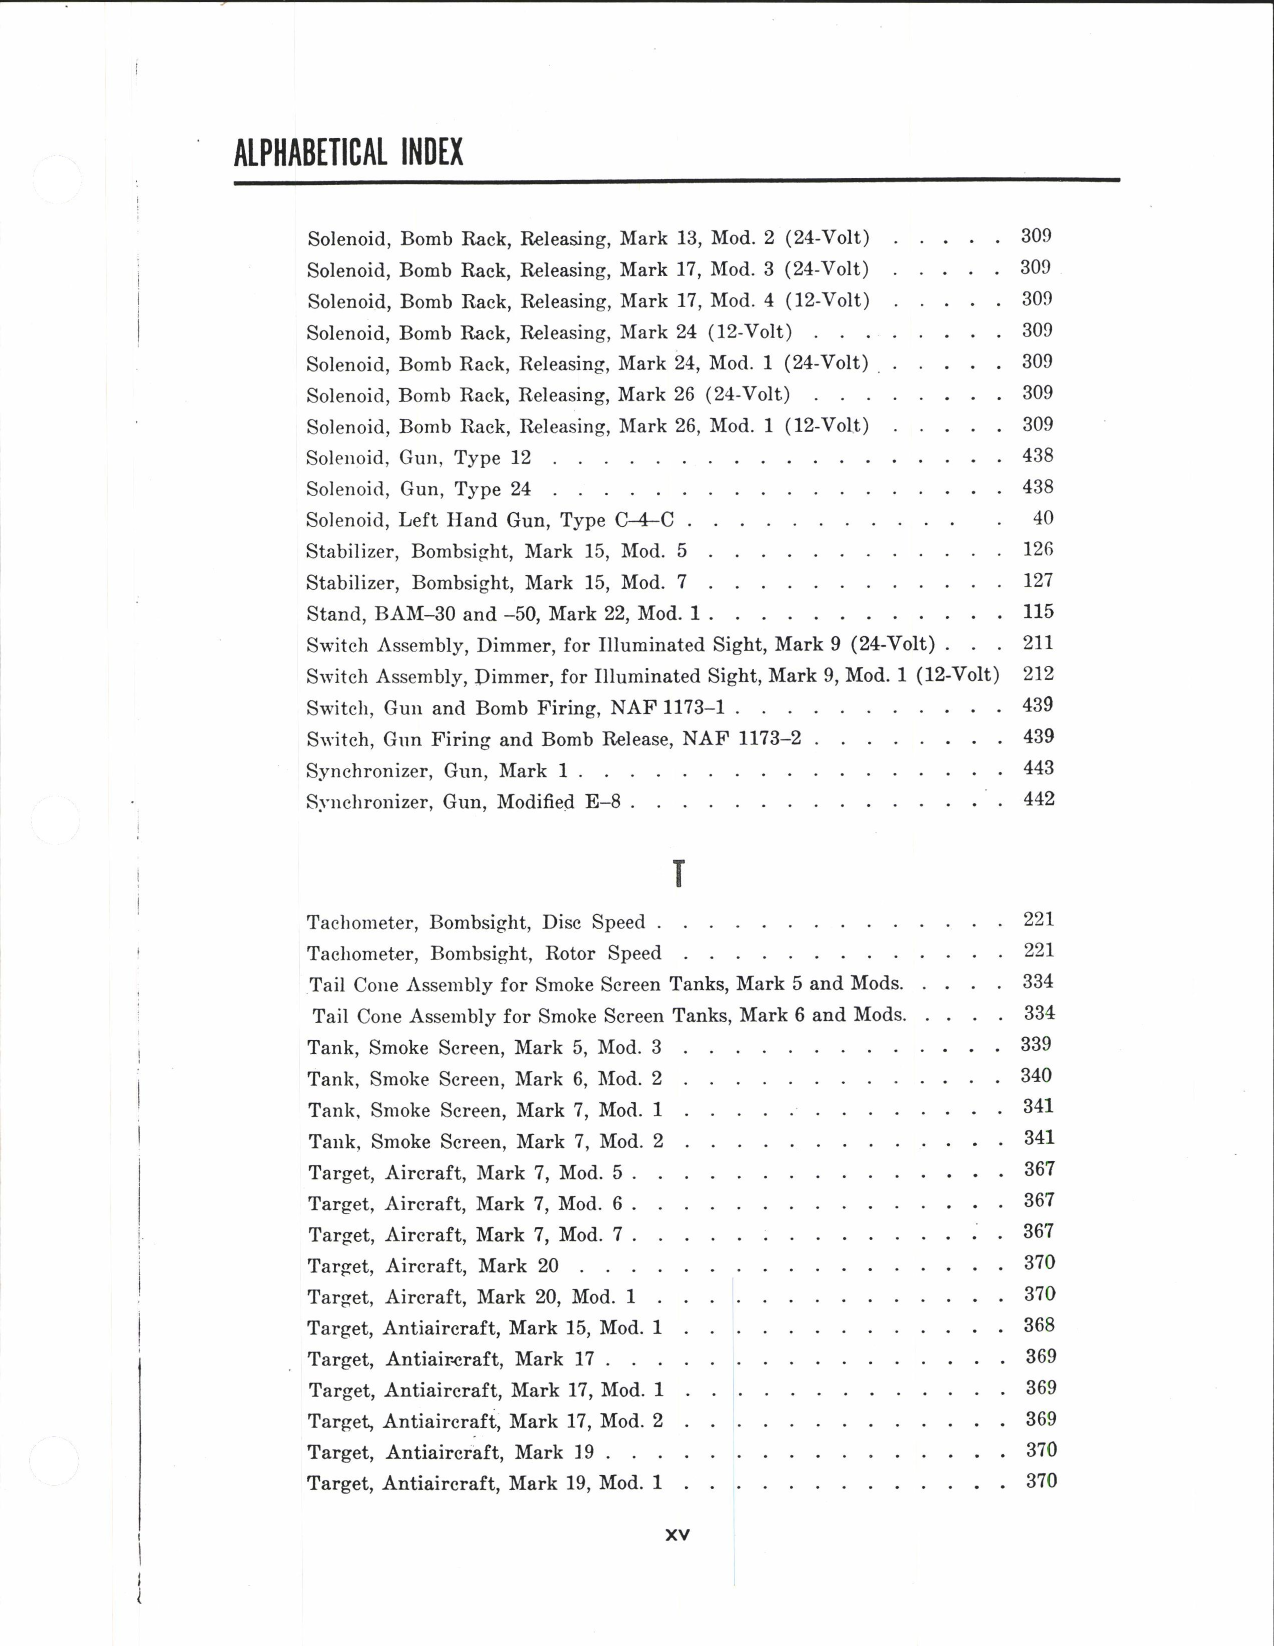 Sample page 3 from AirCorps Library document: Aviation Ordnance Equipment Catalogue for Aircraft Guns and Accessories